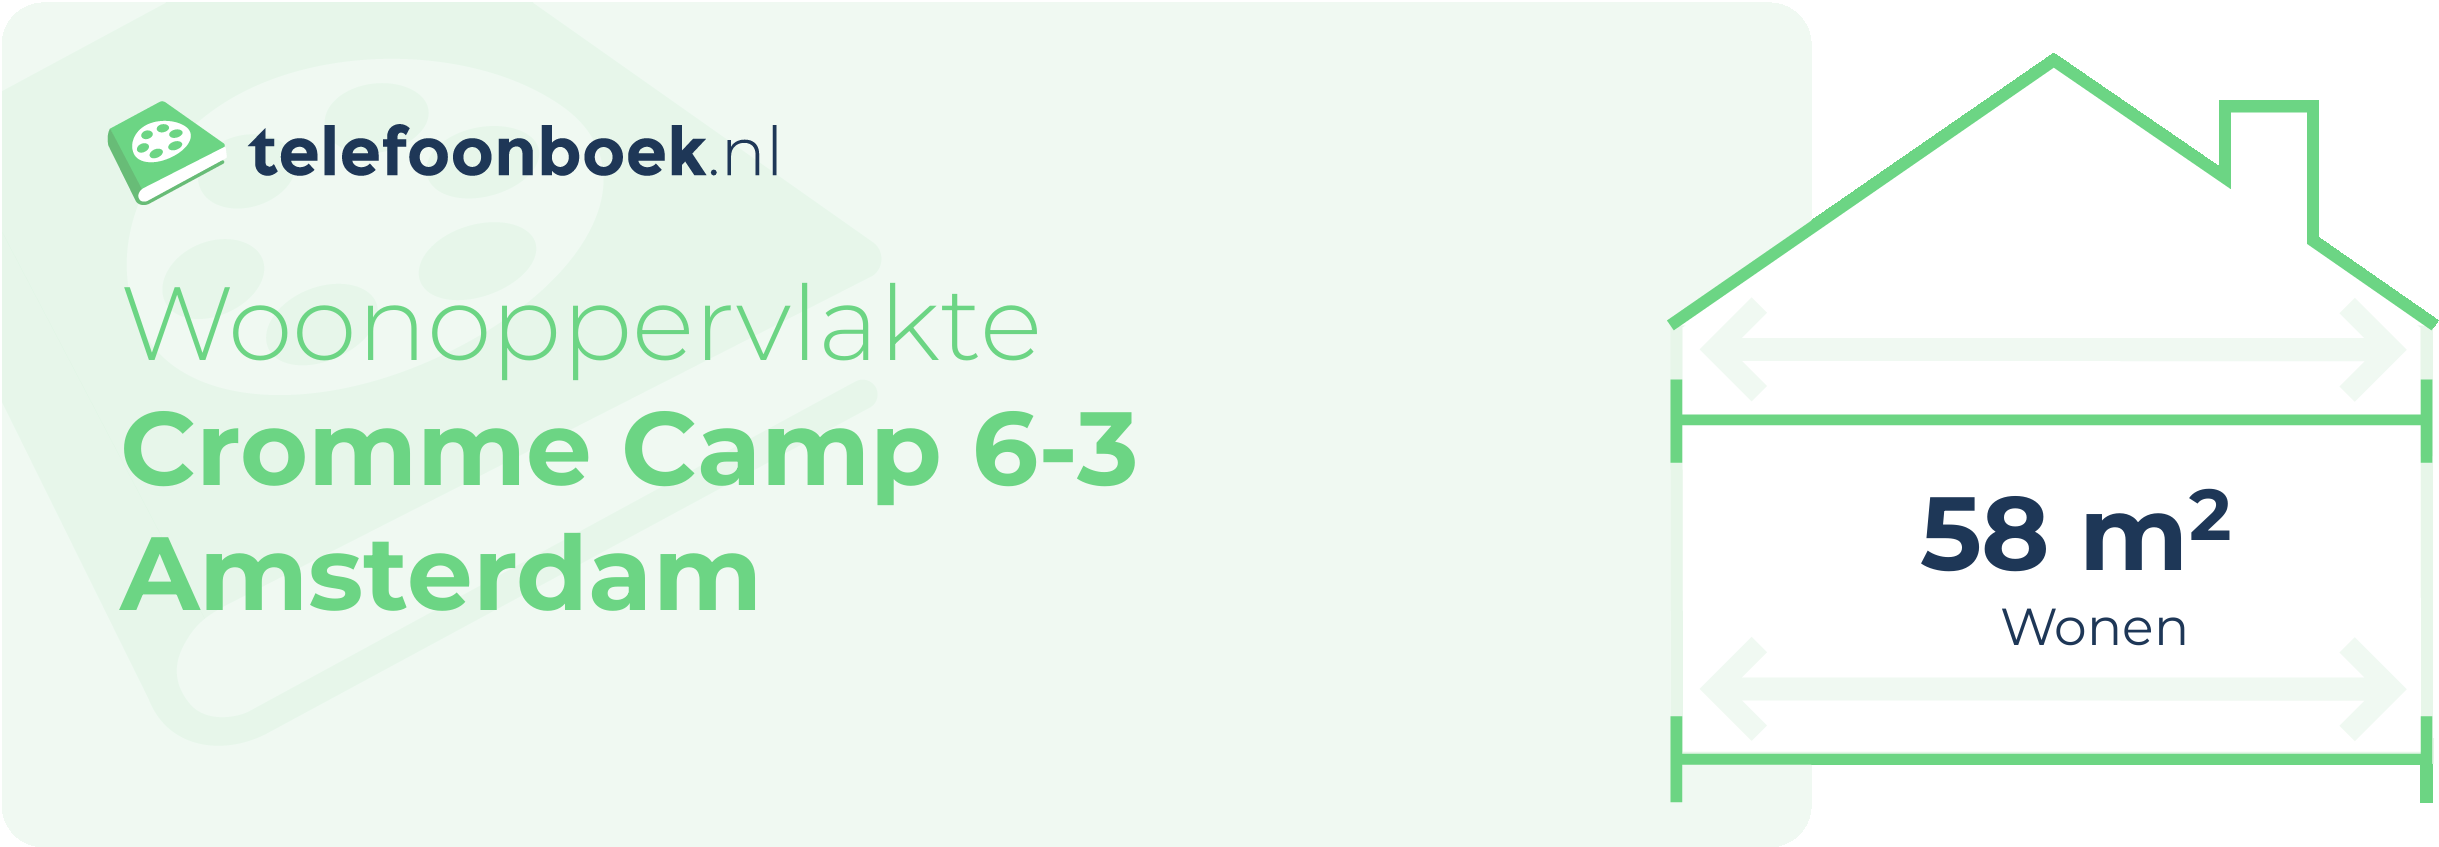 Woonoppervlakte Cromme Camp 6-3 Amsterdam